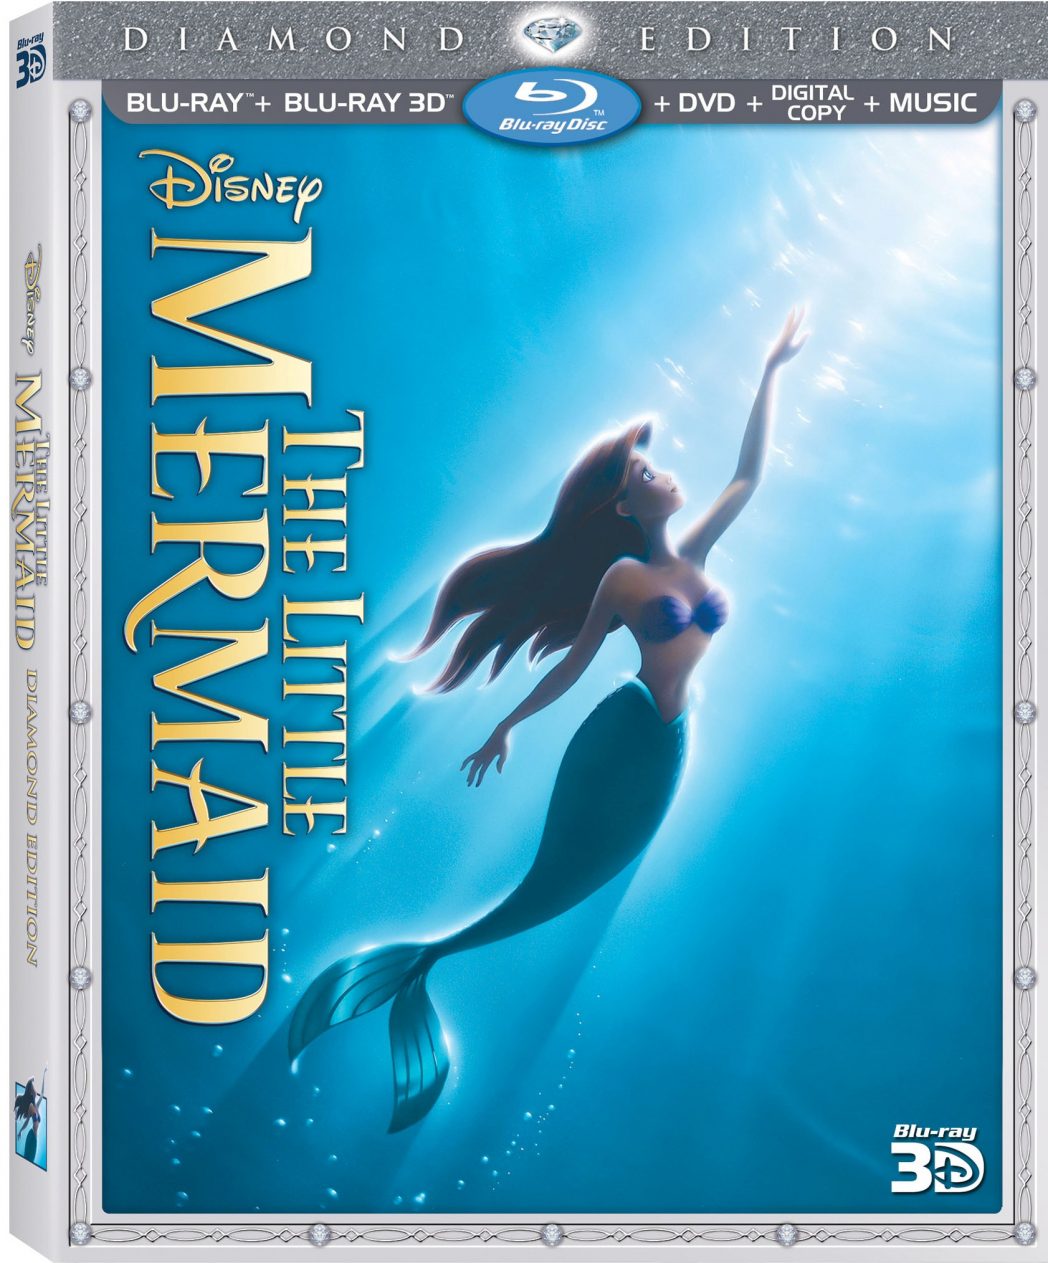 Disney Little Mermaid DVD Review/Giveaway! - The Mommyhood Chronicles